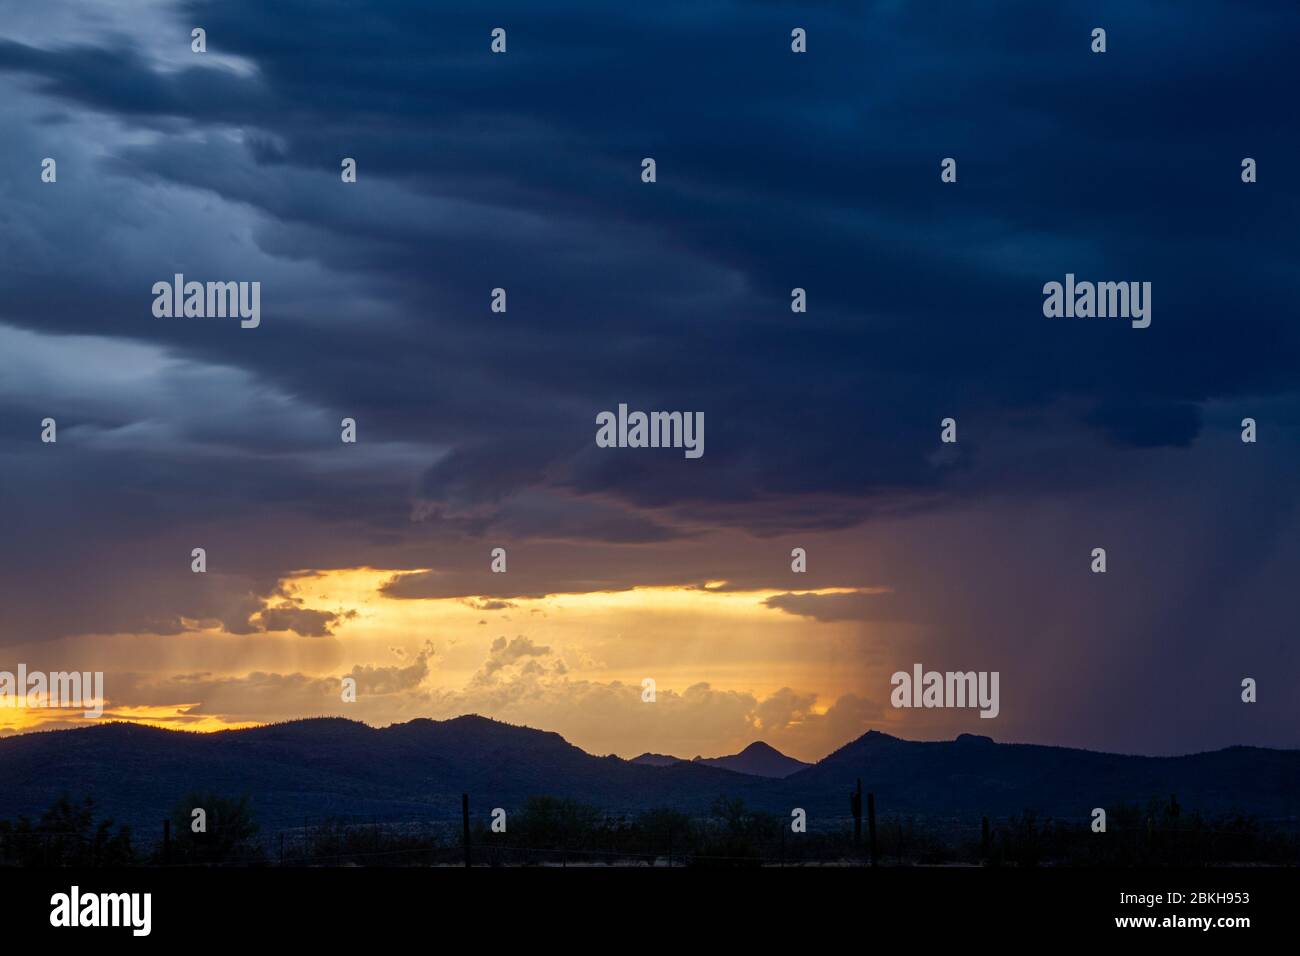 A sunset image of a monsoon in the Sonoran desert of Arizona. Stock Photo